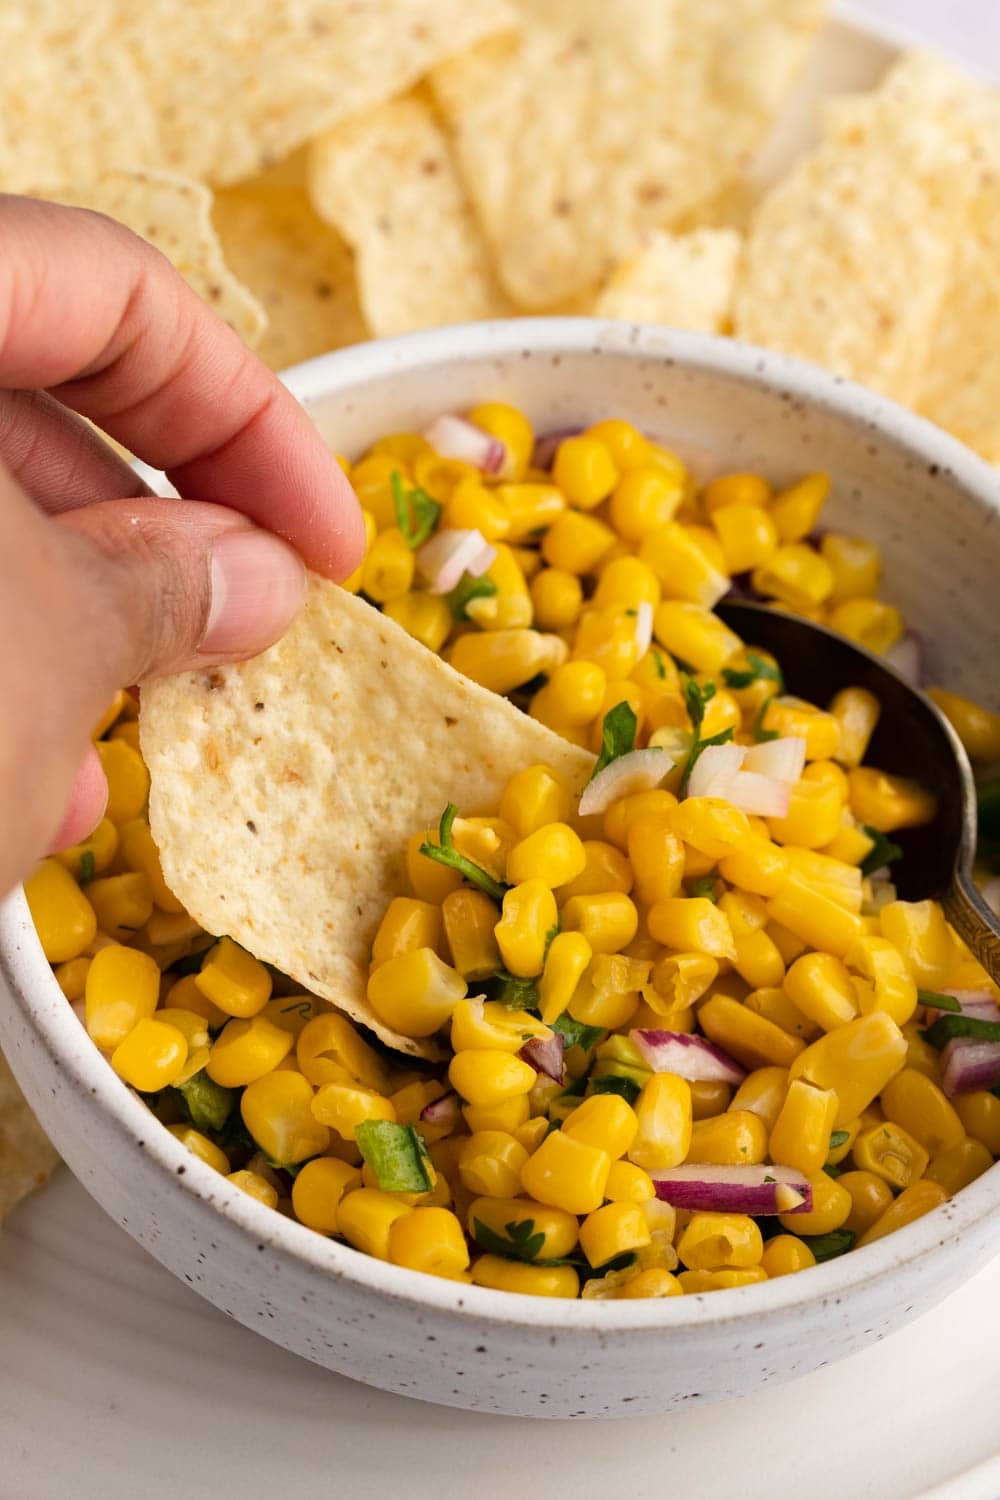 Homemade Chipotle Corn Salsa with Chips